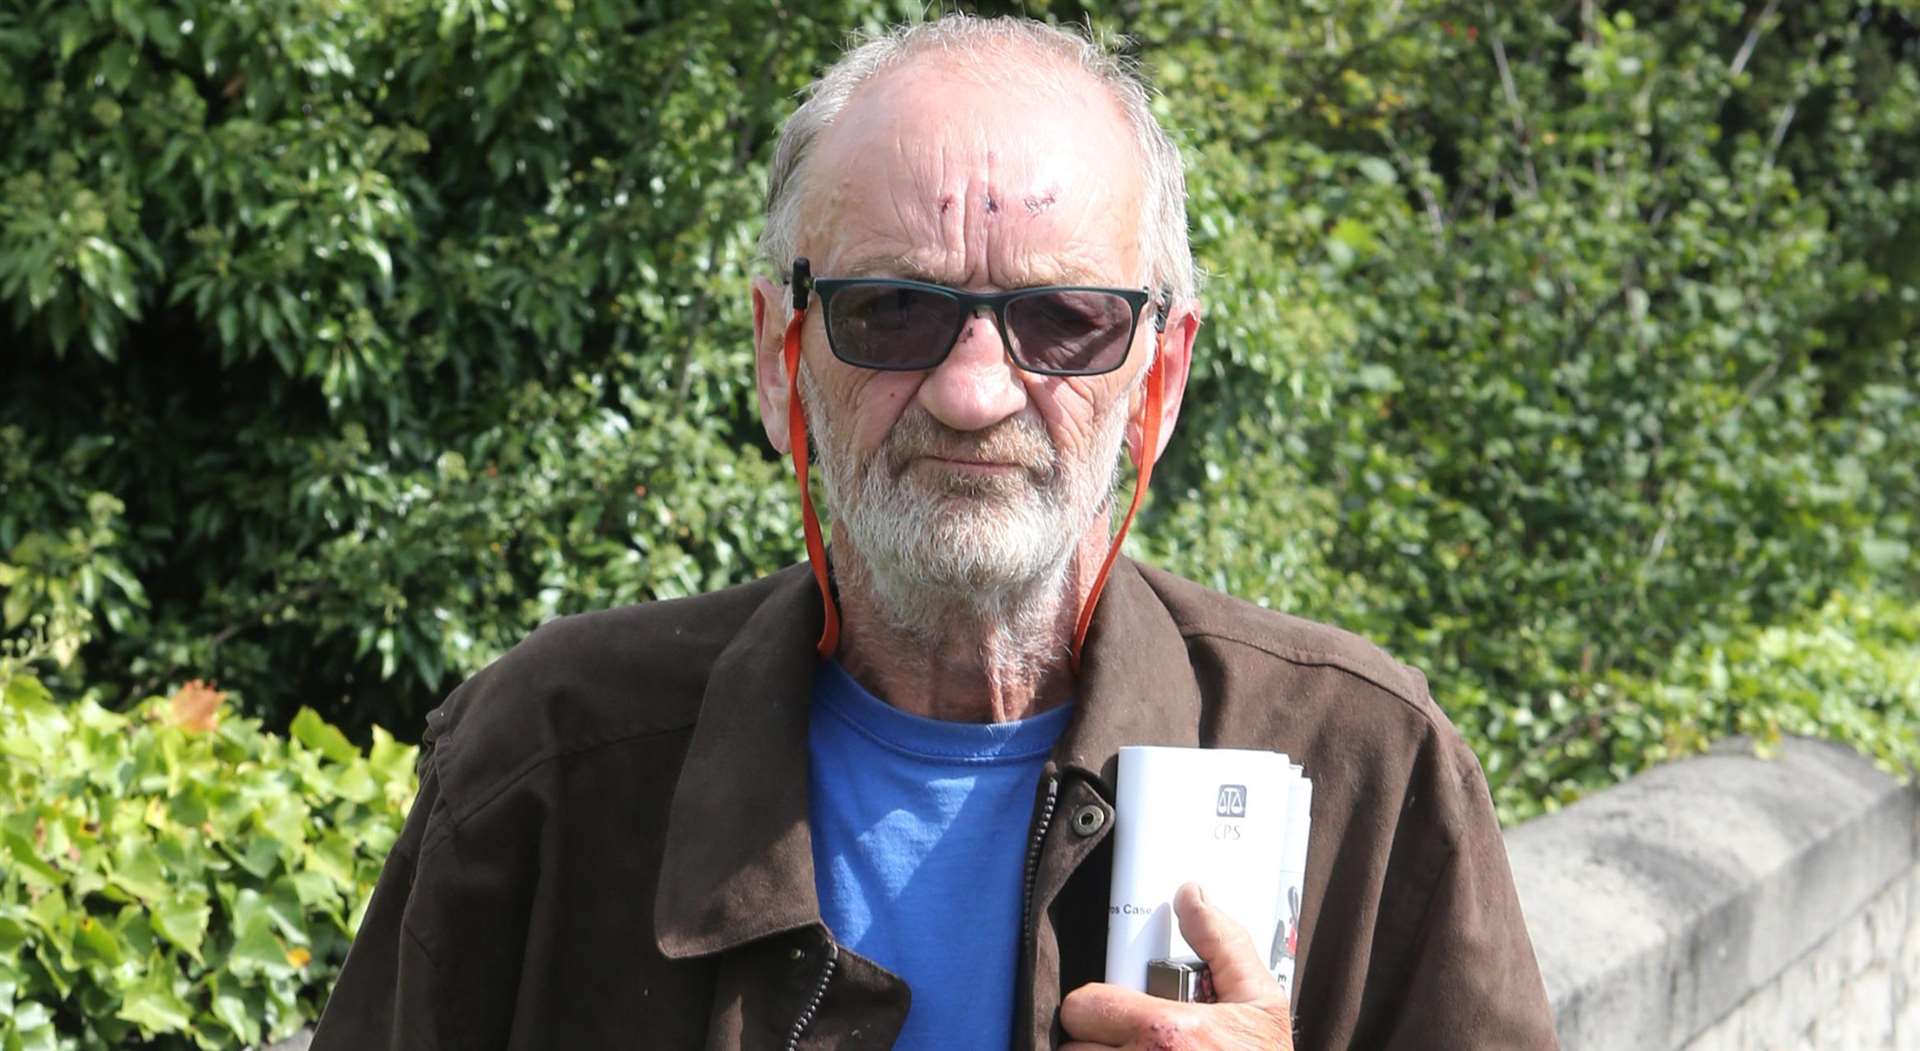 John Mcenery, 73, former BAFTA nominated who is accused of having a black water pistol and pretending it was a gun, pictured after his court appearance at Maidstone Magistrates. Picture by: John Westhrop